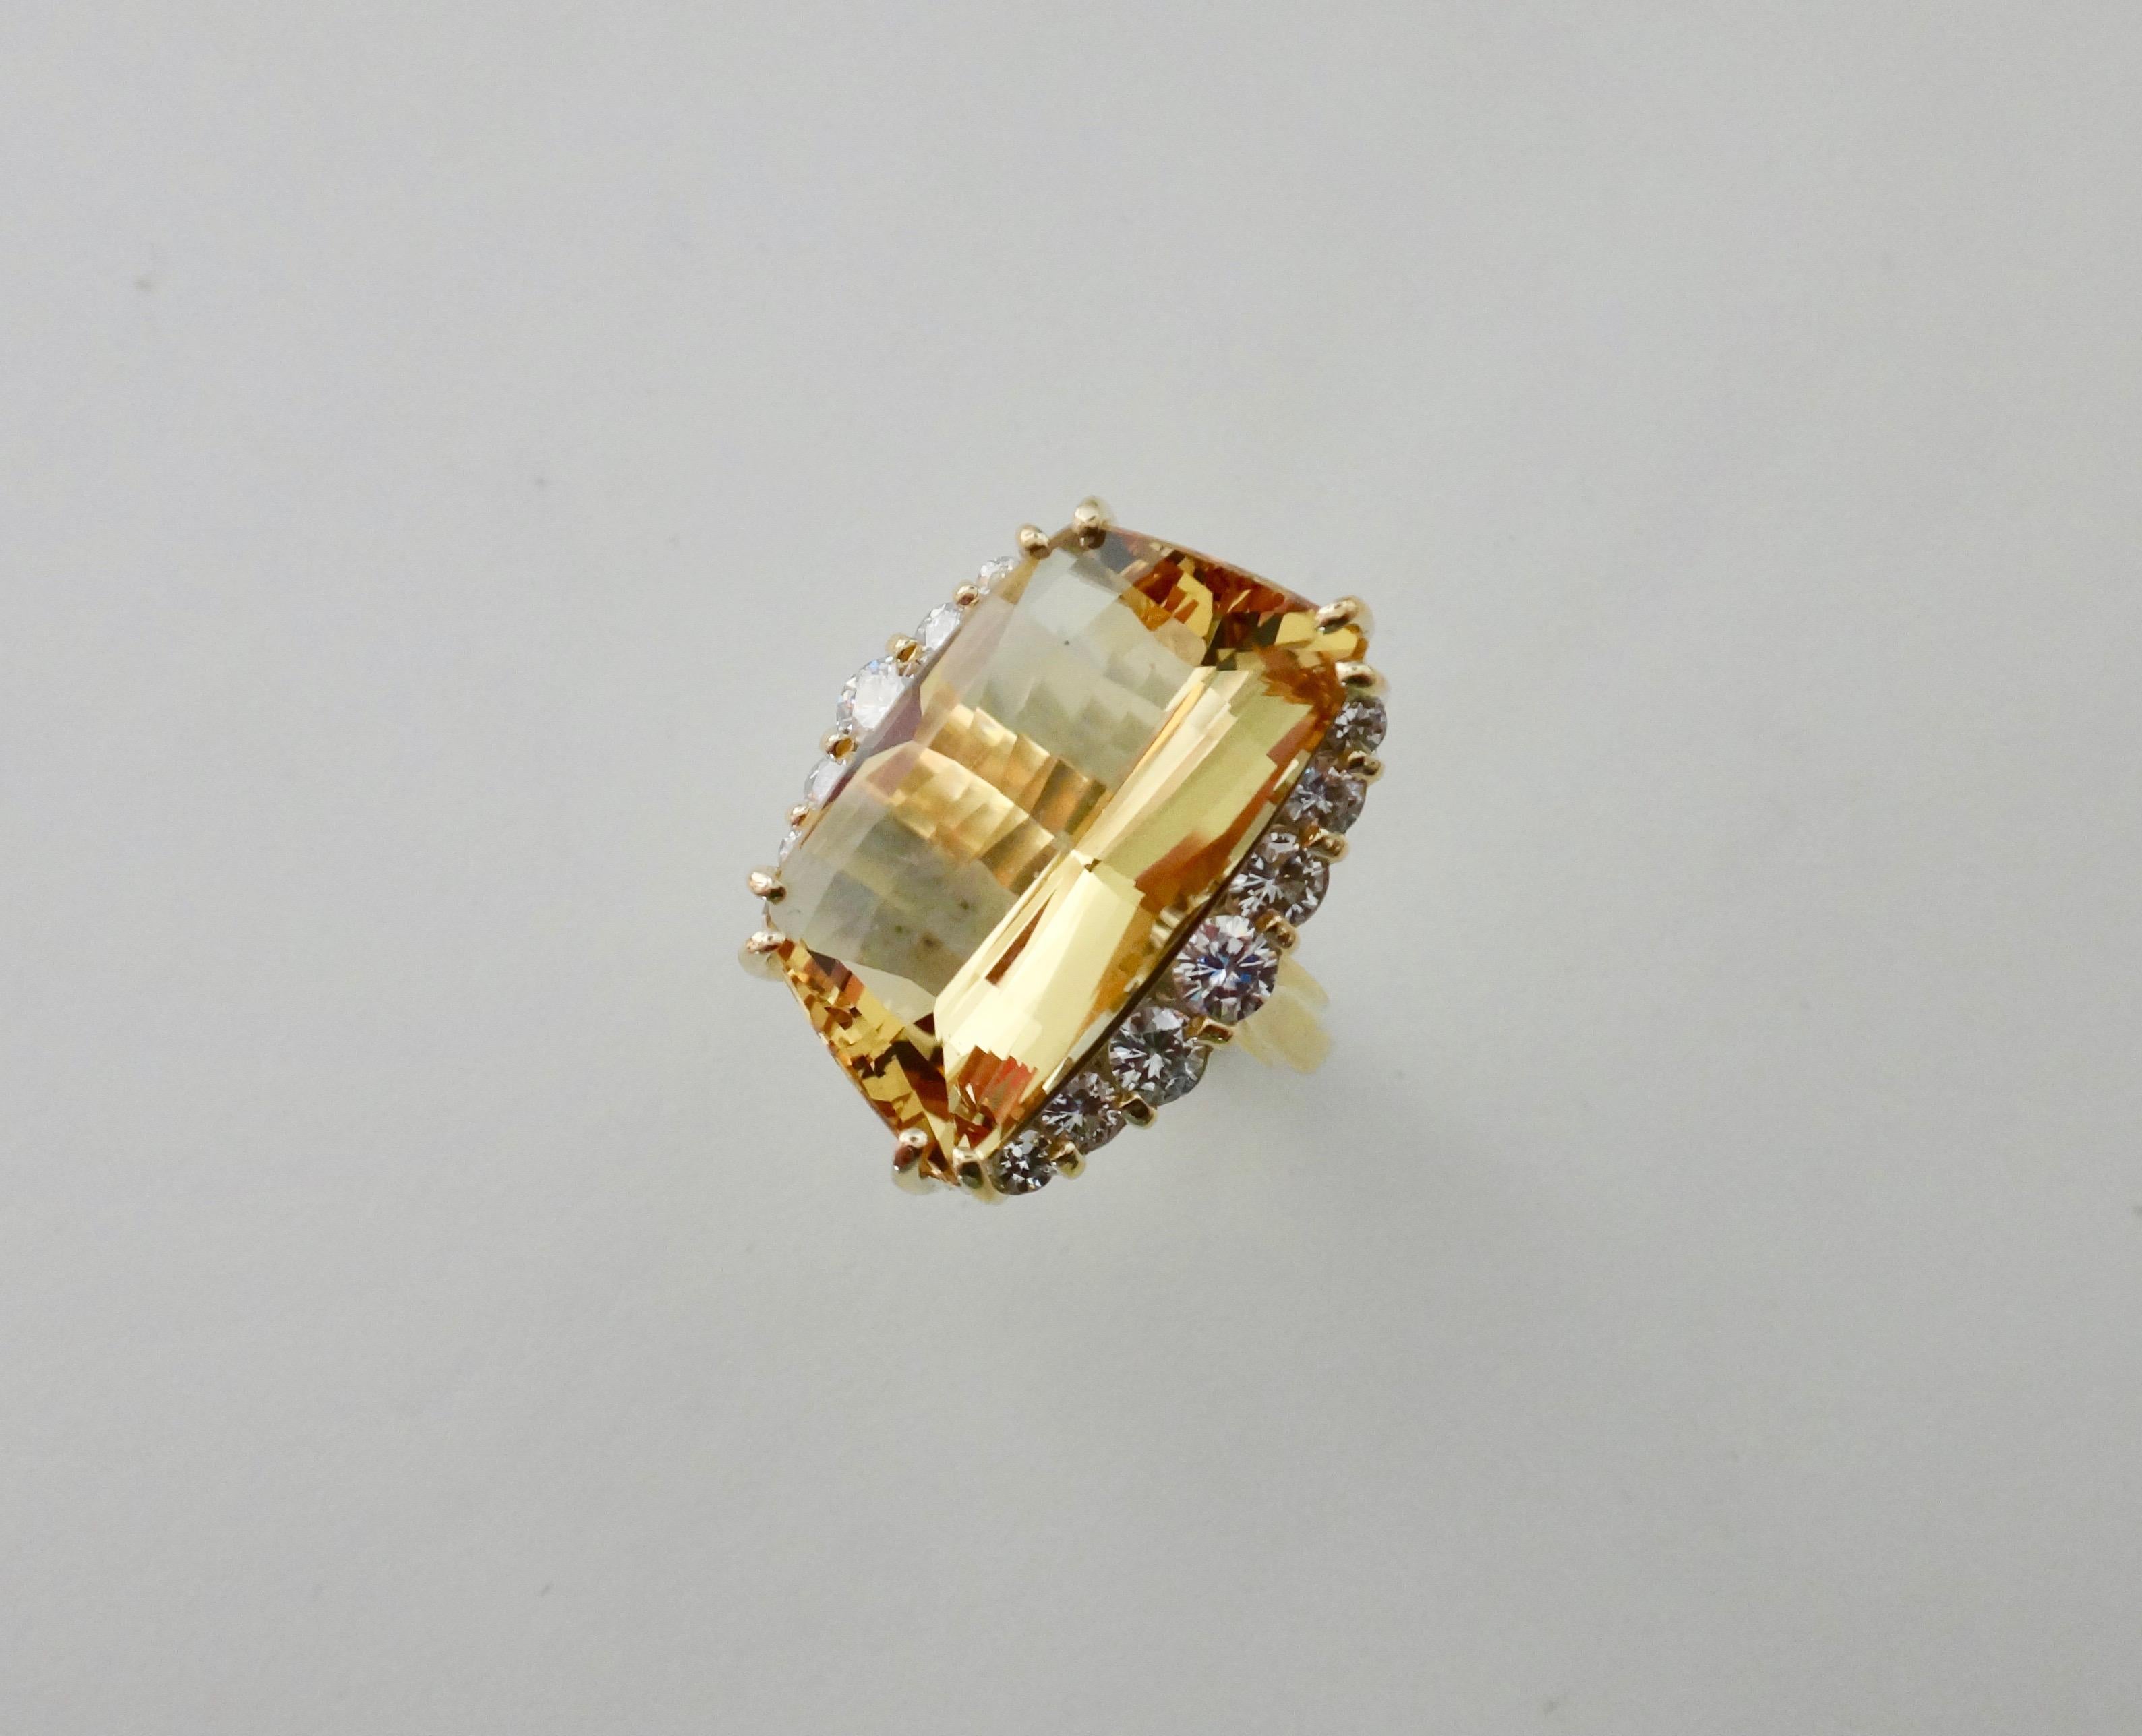 Scintillating is the only way to describe this one-of-a-kind golden beryl (origin: Brazil).  Beryl is a large family of gems including aquamarine, morganite, emerald, heliodore and chrysoberyl cat's eye.  This is the yellow version of the gem